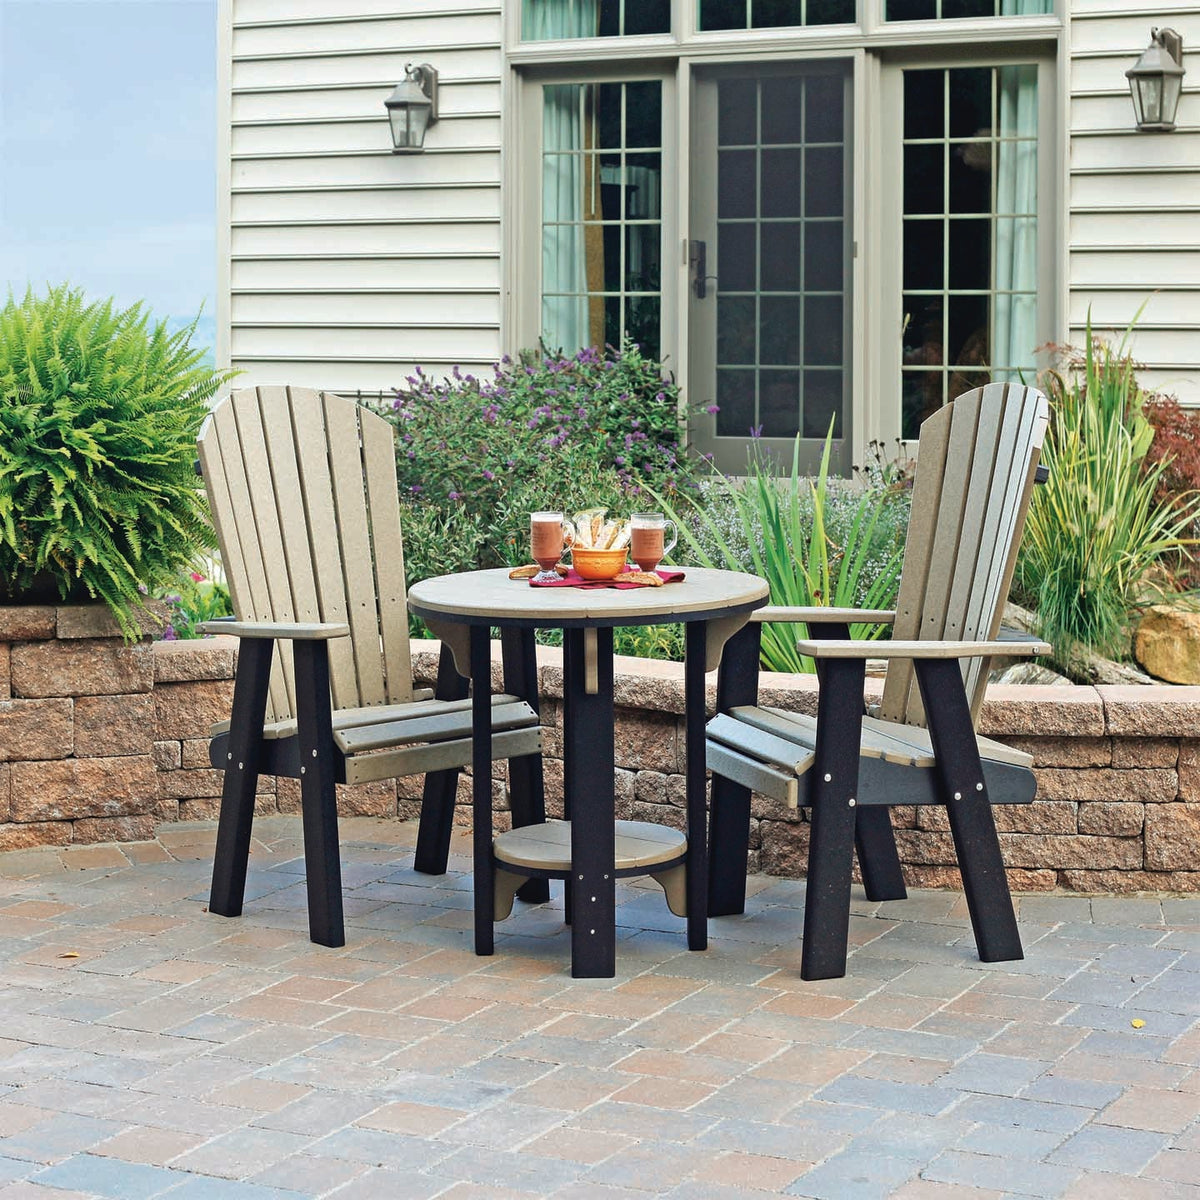 Amish Bistro Dining Chair Leisure Lawns